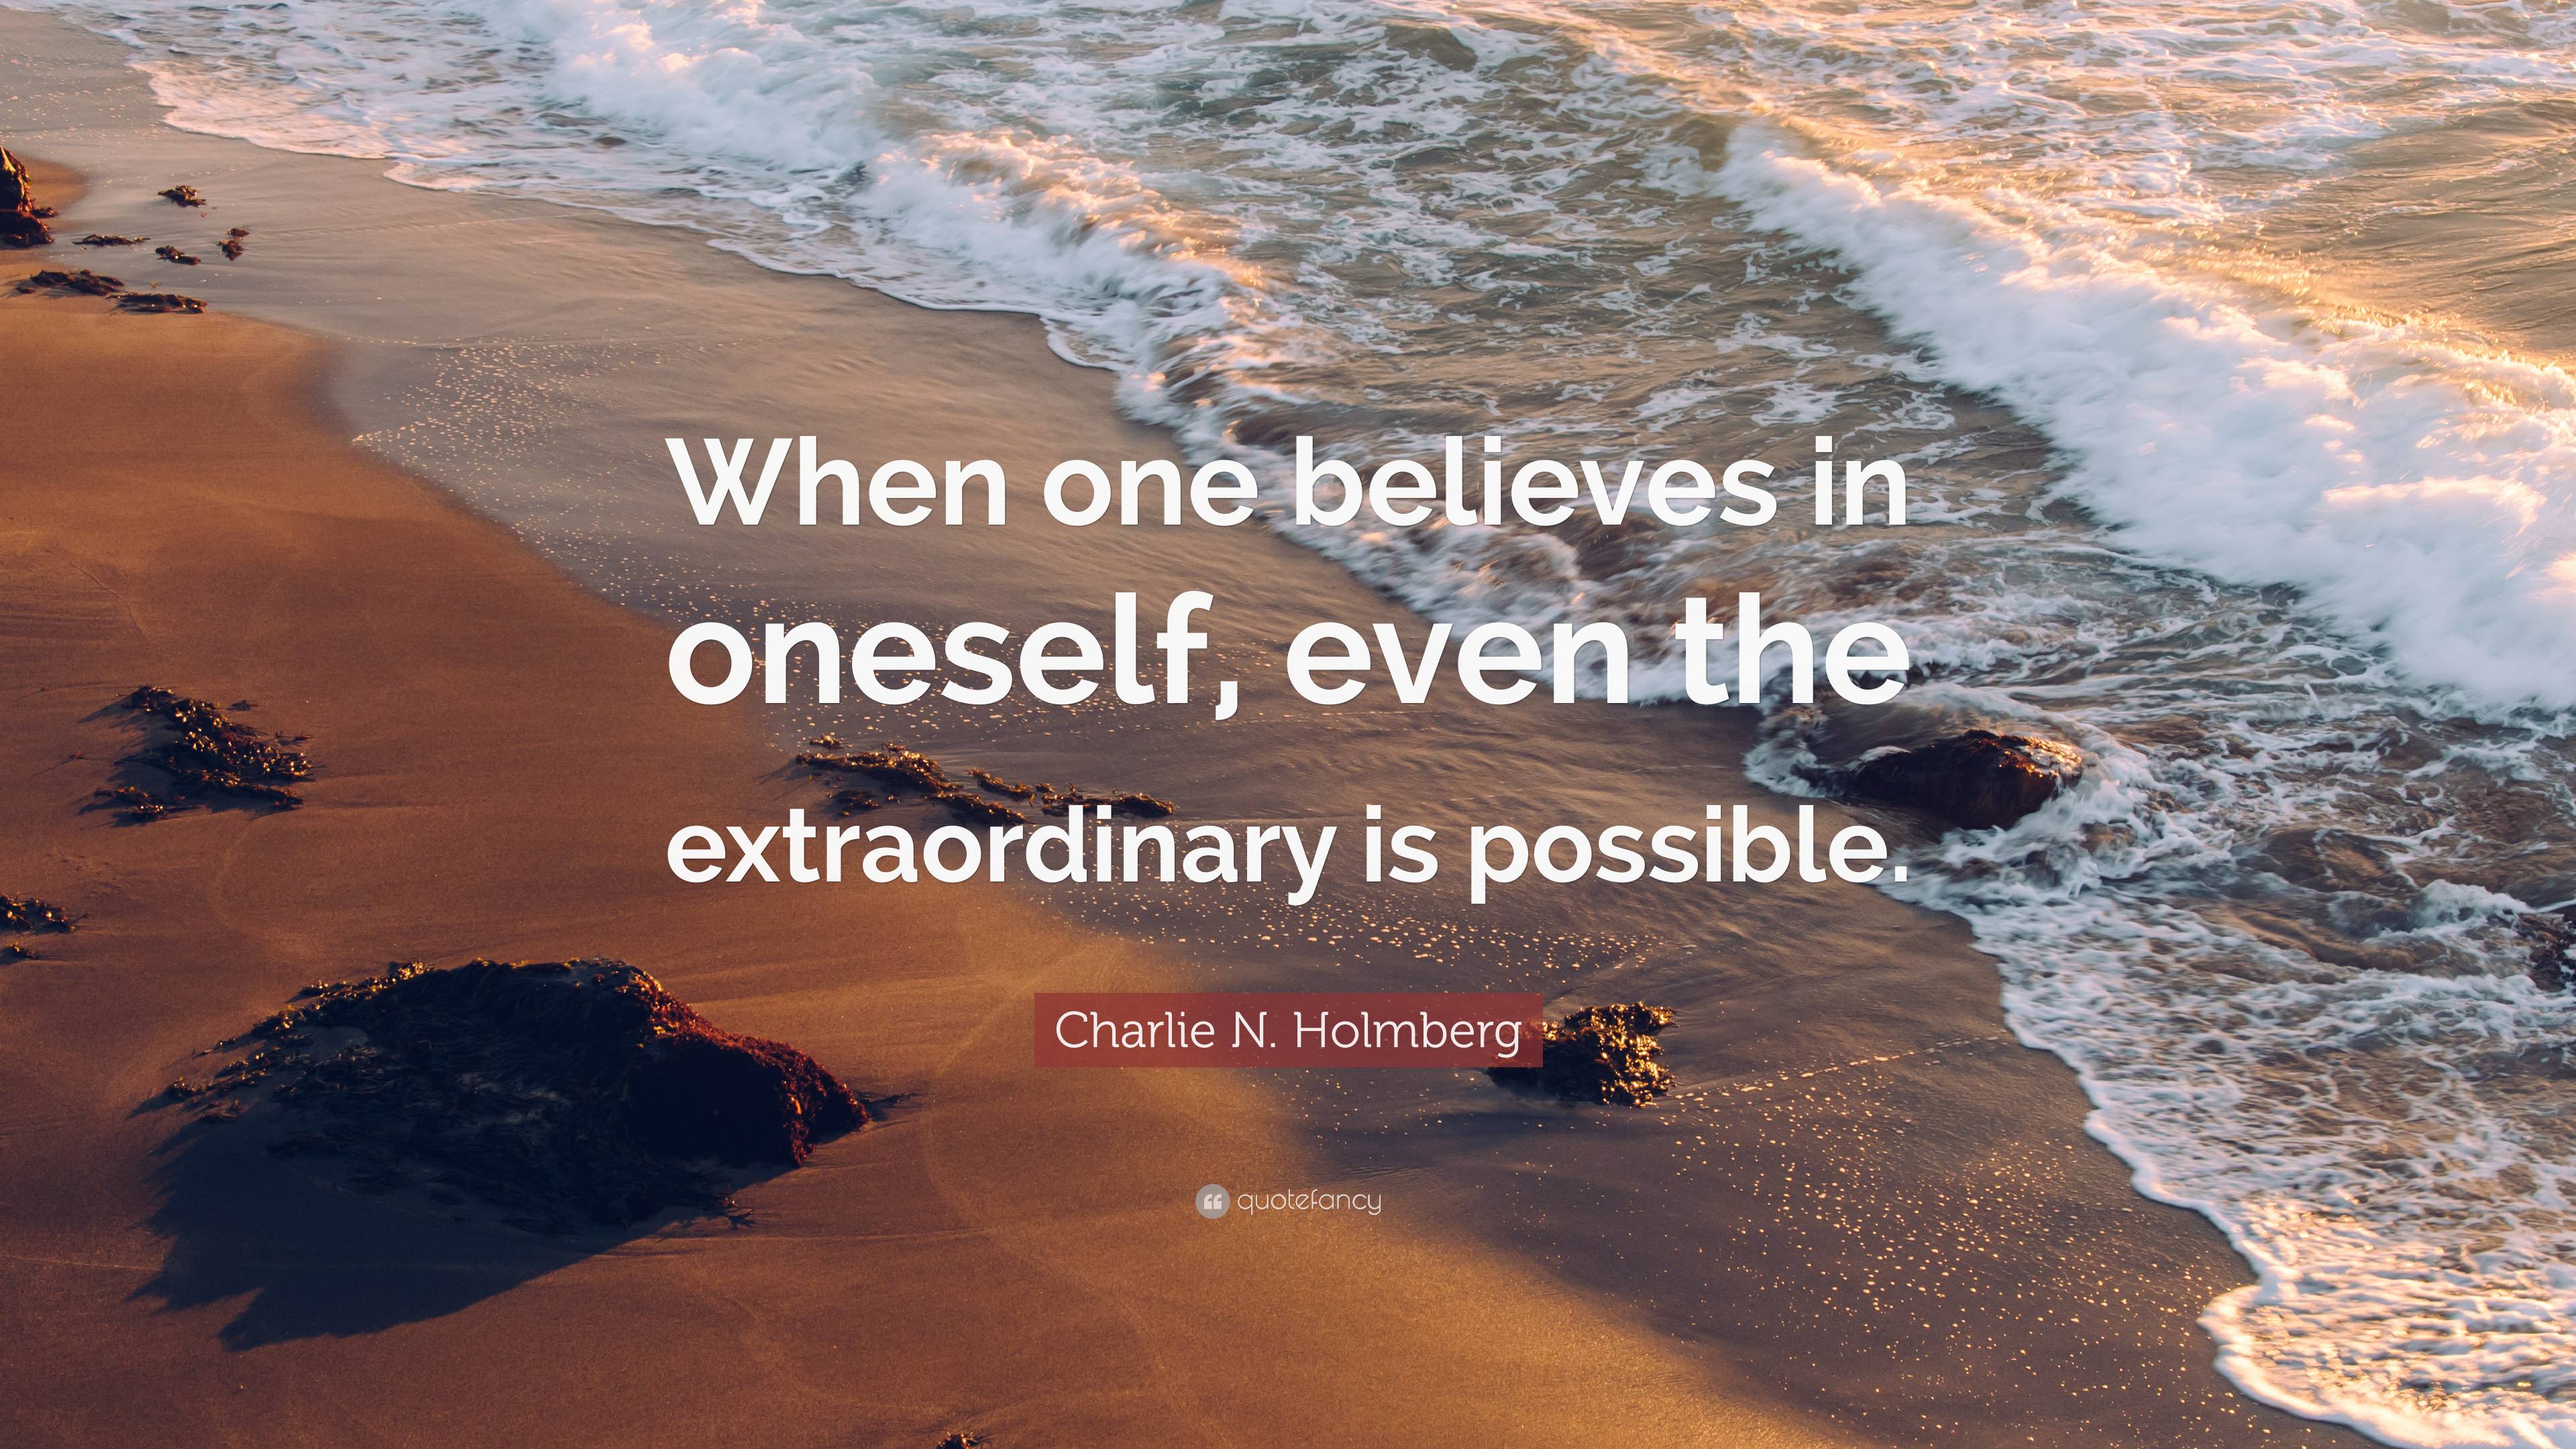 Charlie N. Holmberg Quote: “When one believes in oneself, even the ...